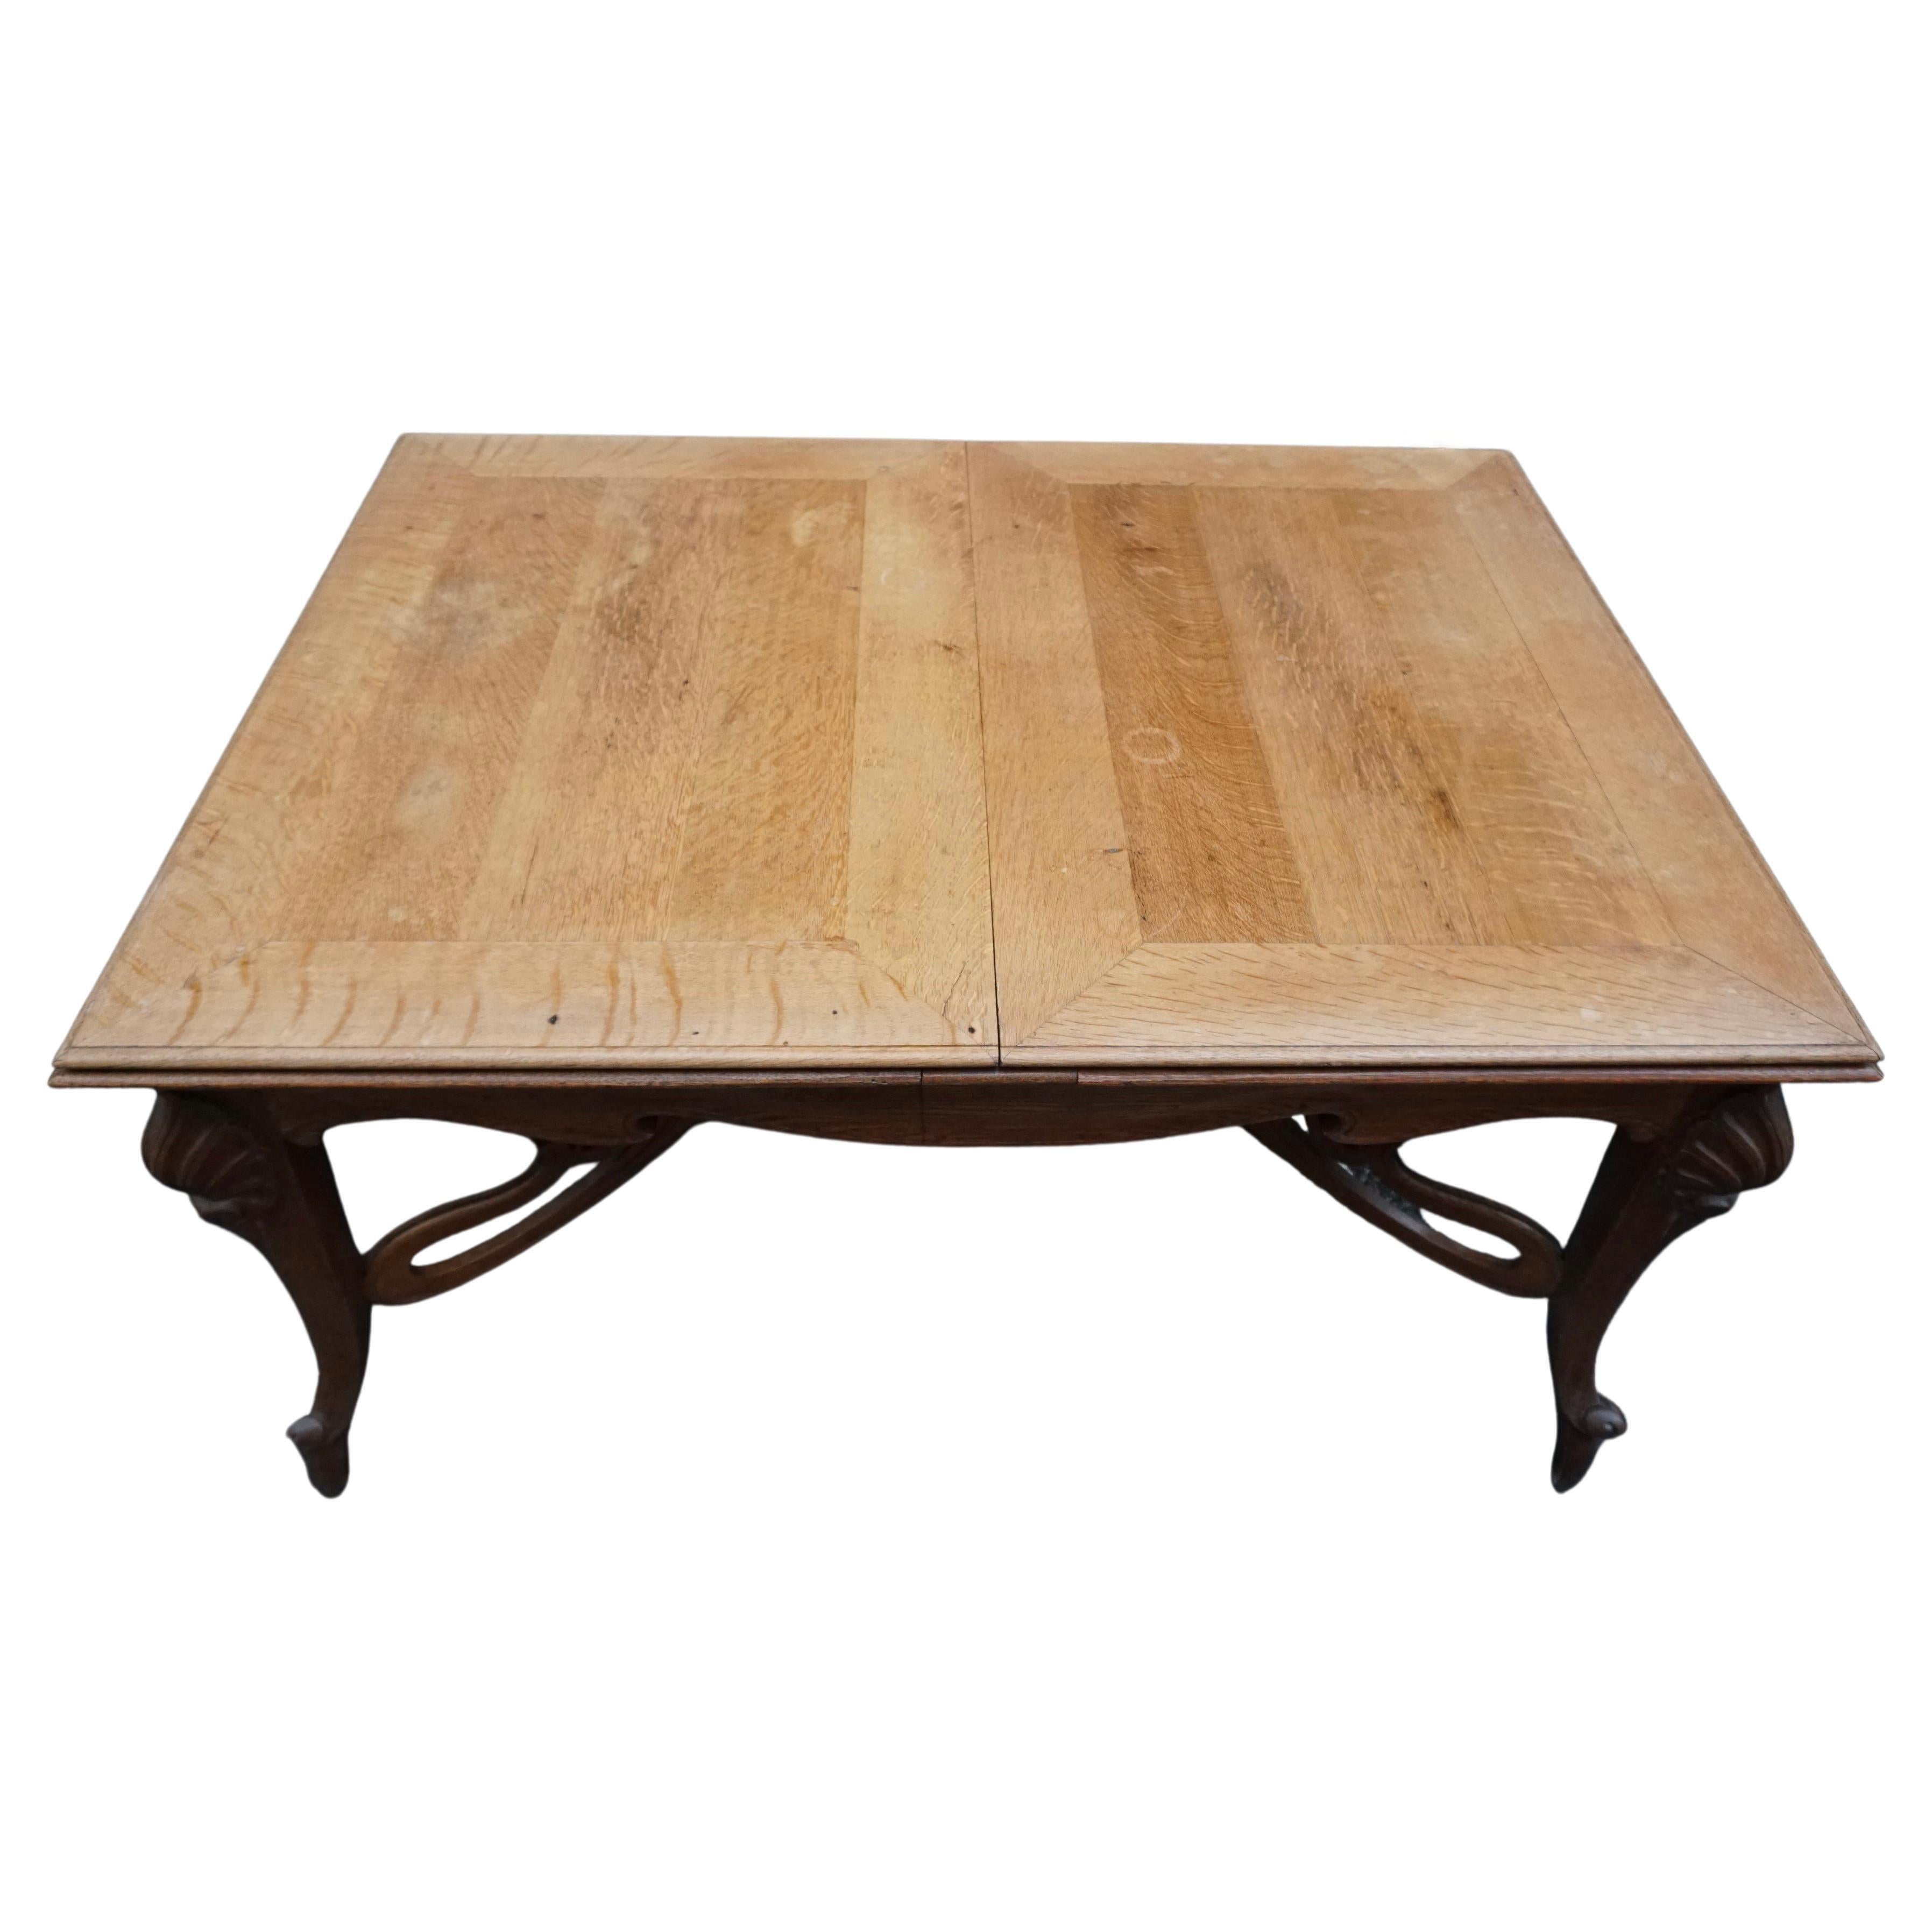 Carved Art Nouveau Dining Table For Sale